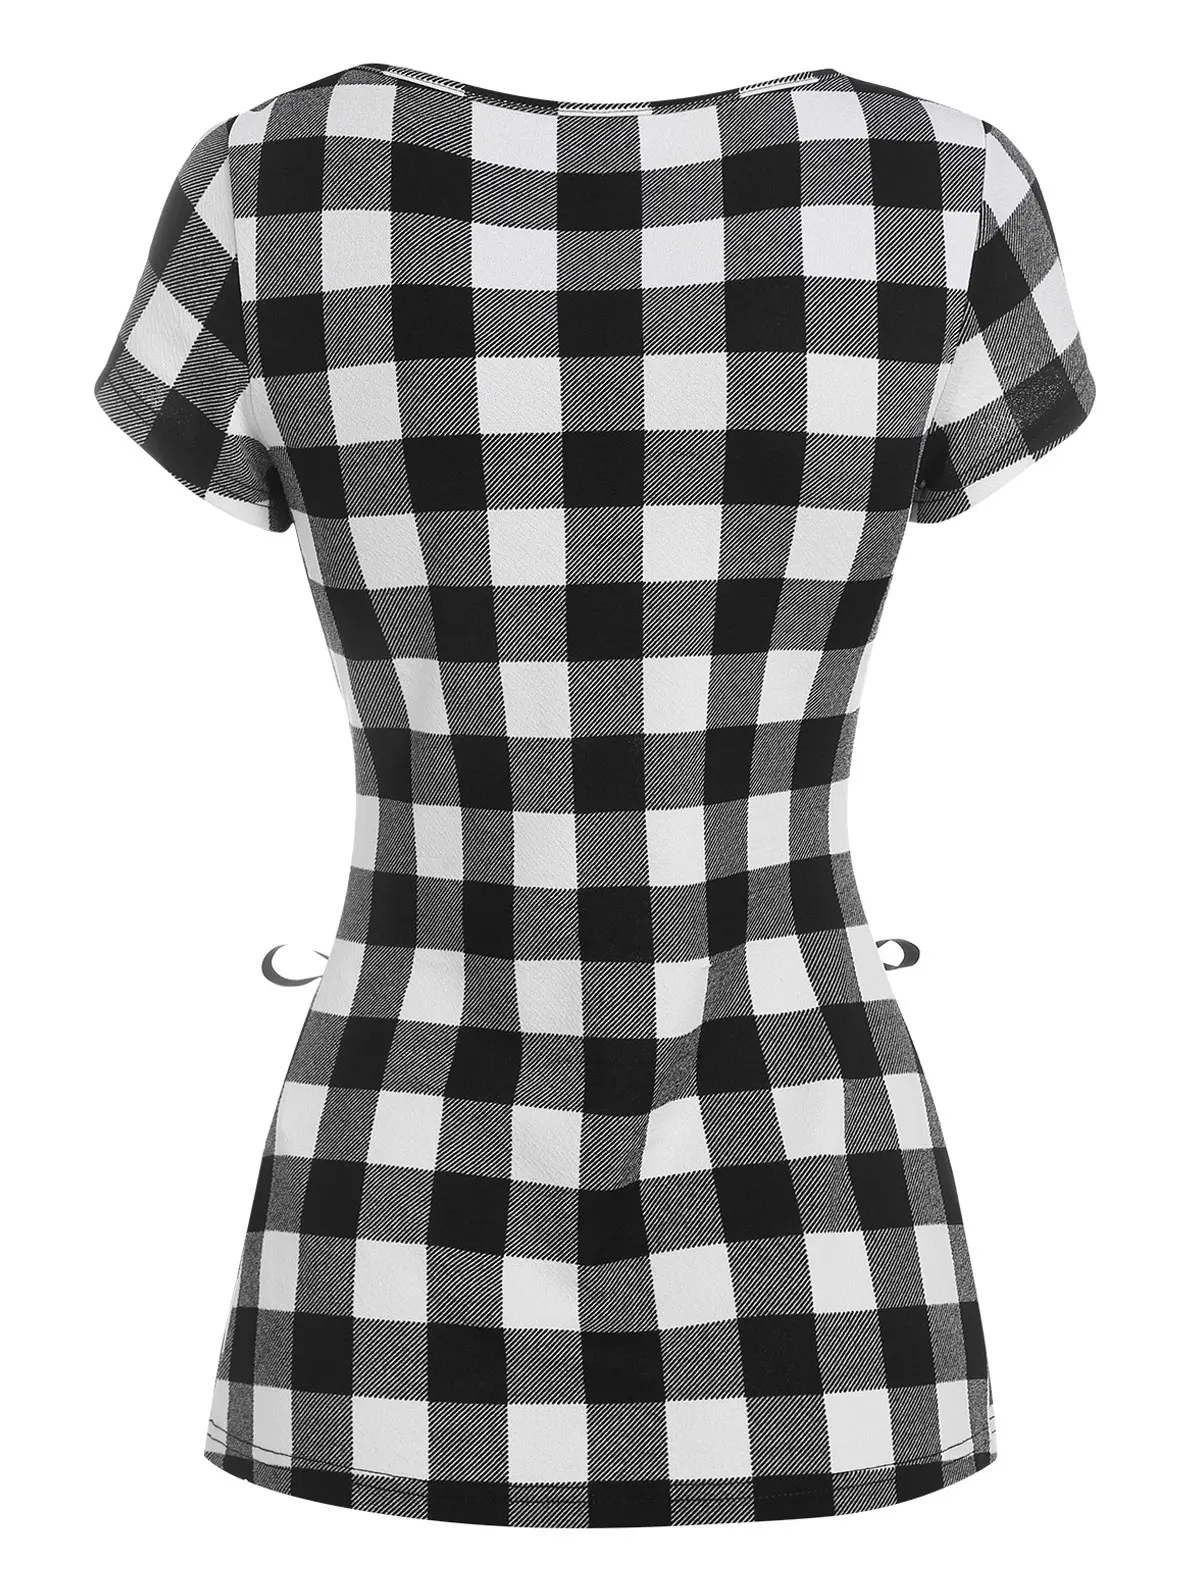 Women Short Sleeve Plaid Tops Emo Tee Sweetheart Neck T Shirt Checkerboard Lace Up Classical Casual T Shirt